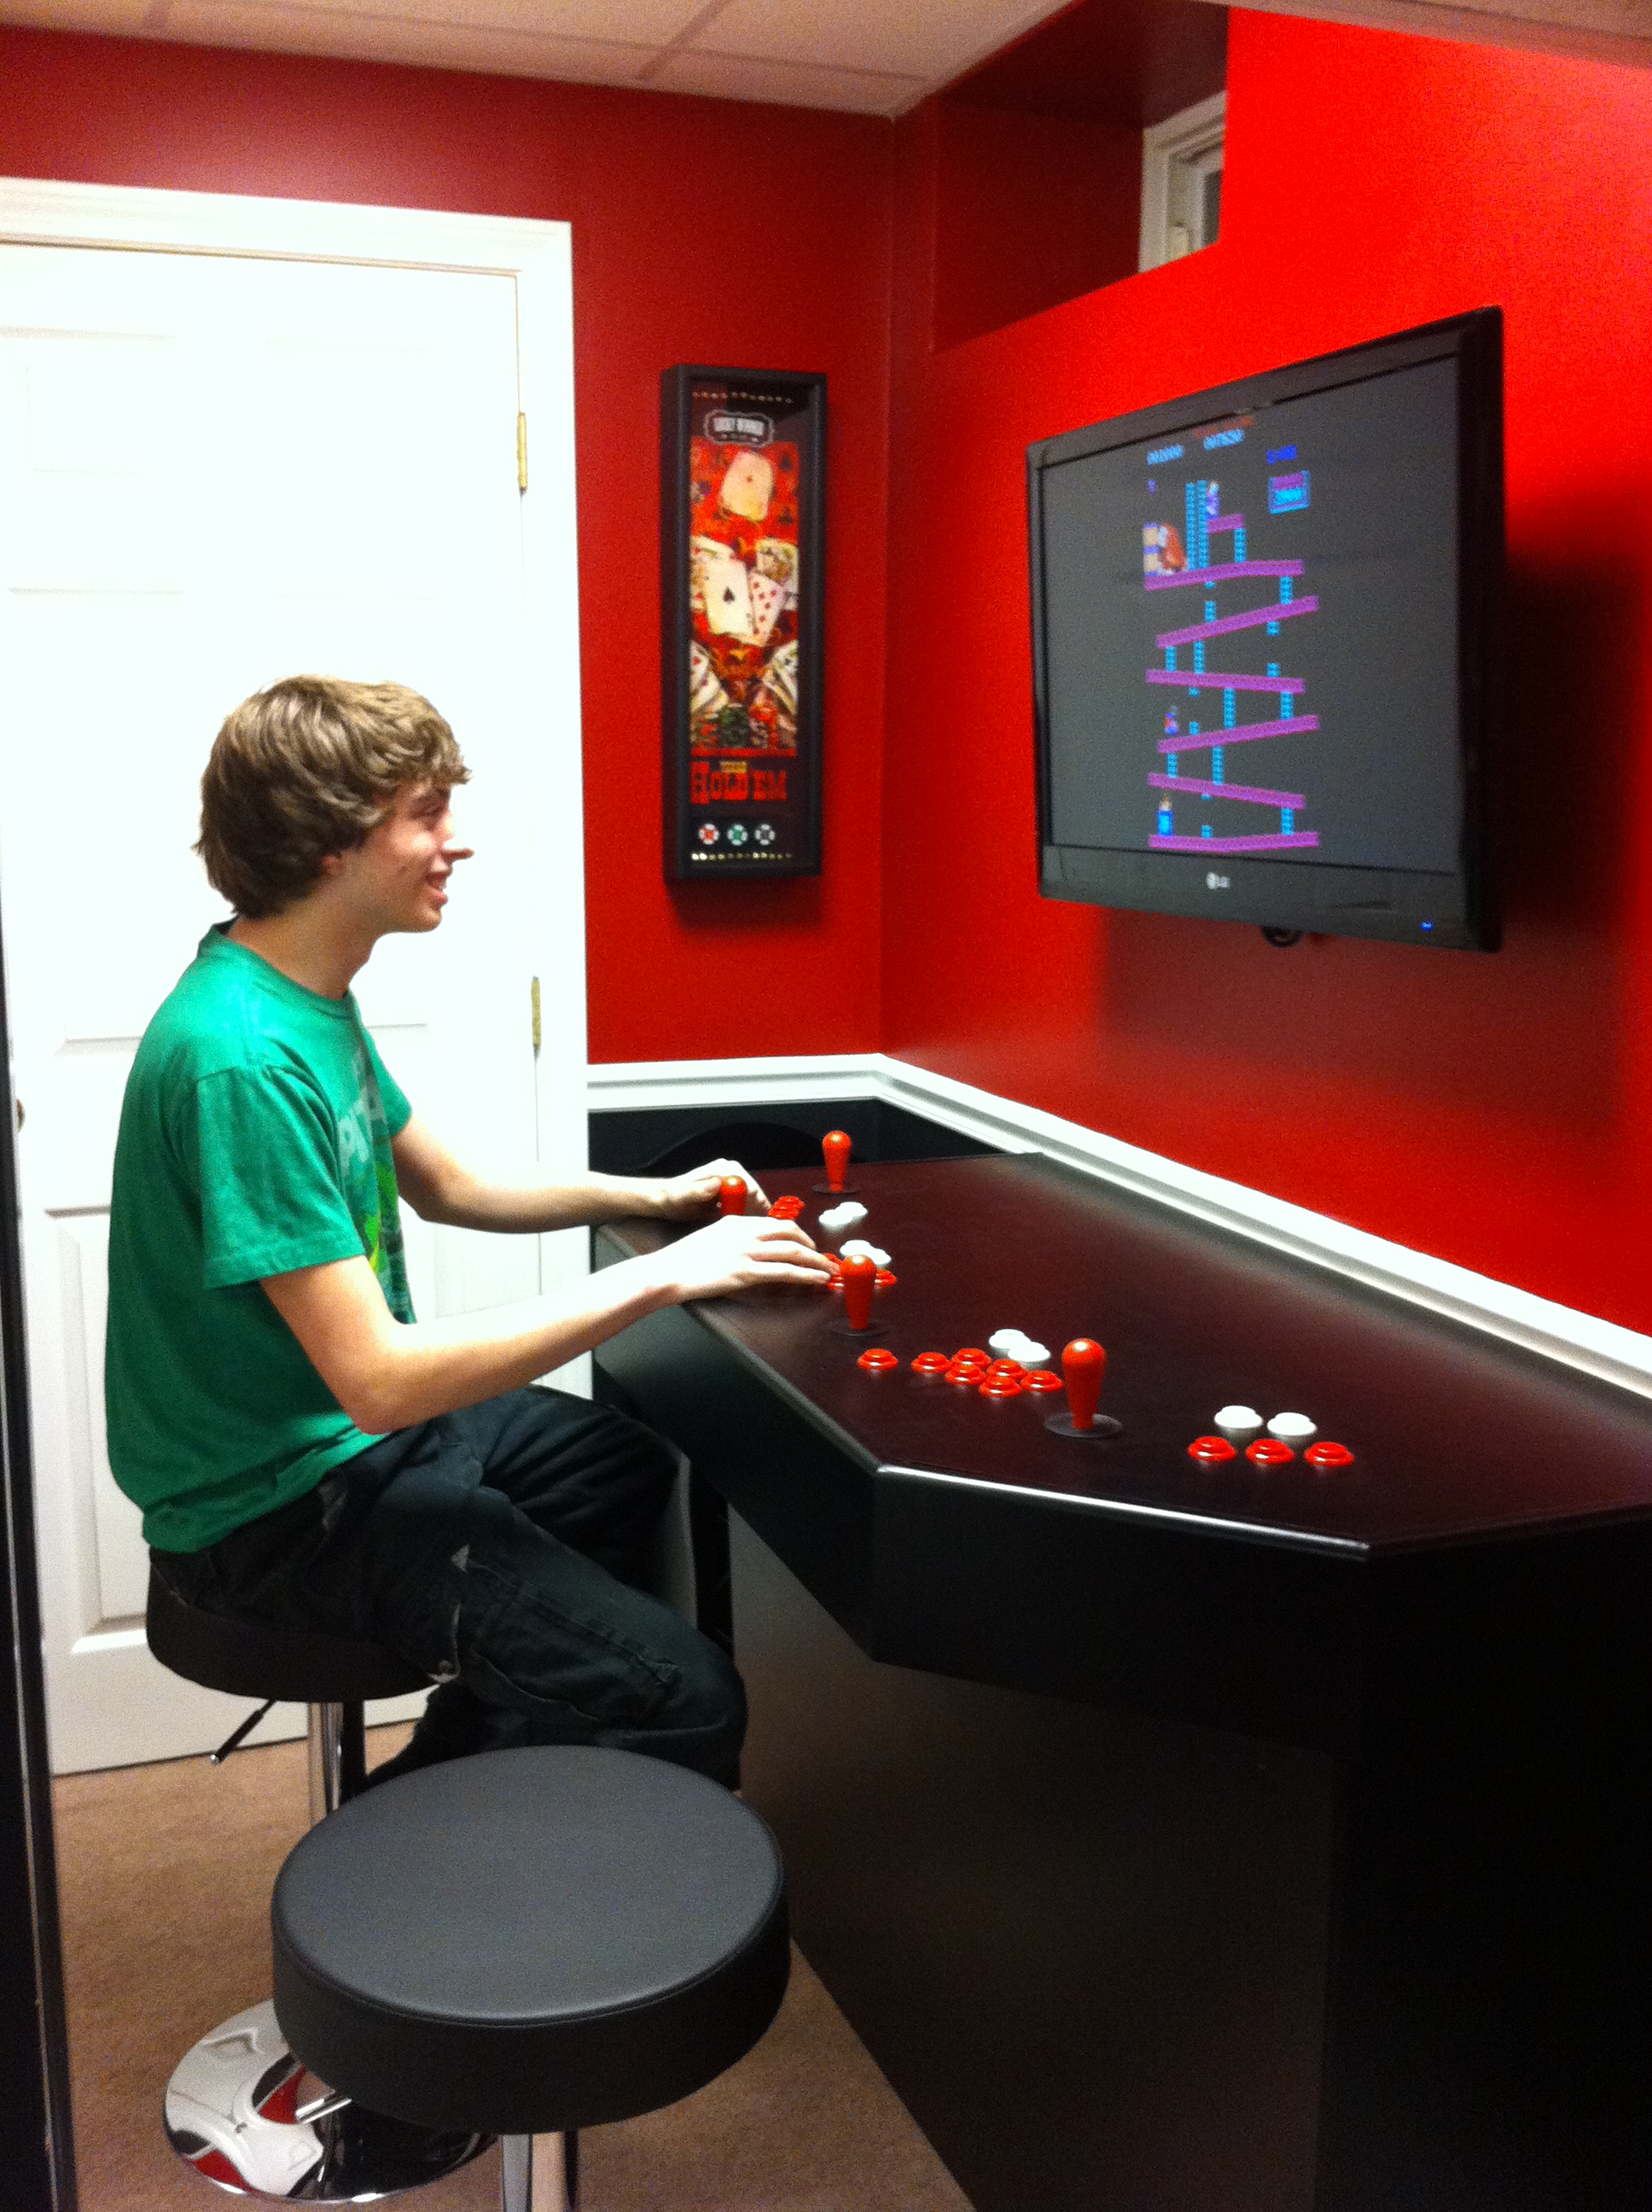 Full cabinet view, four player stations visible